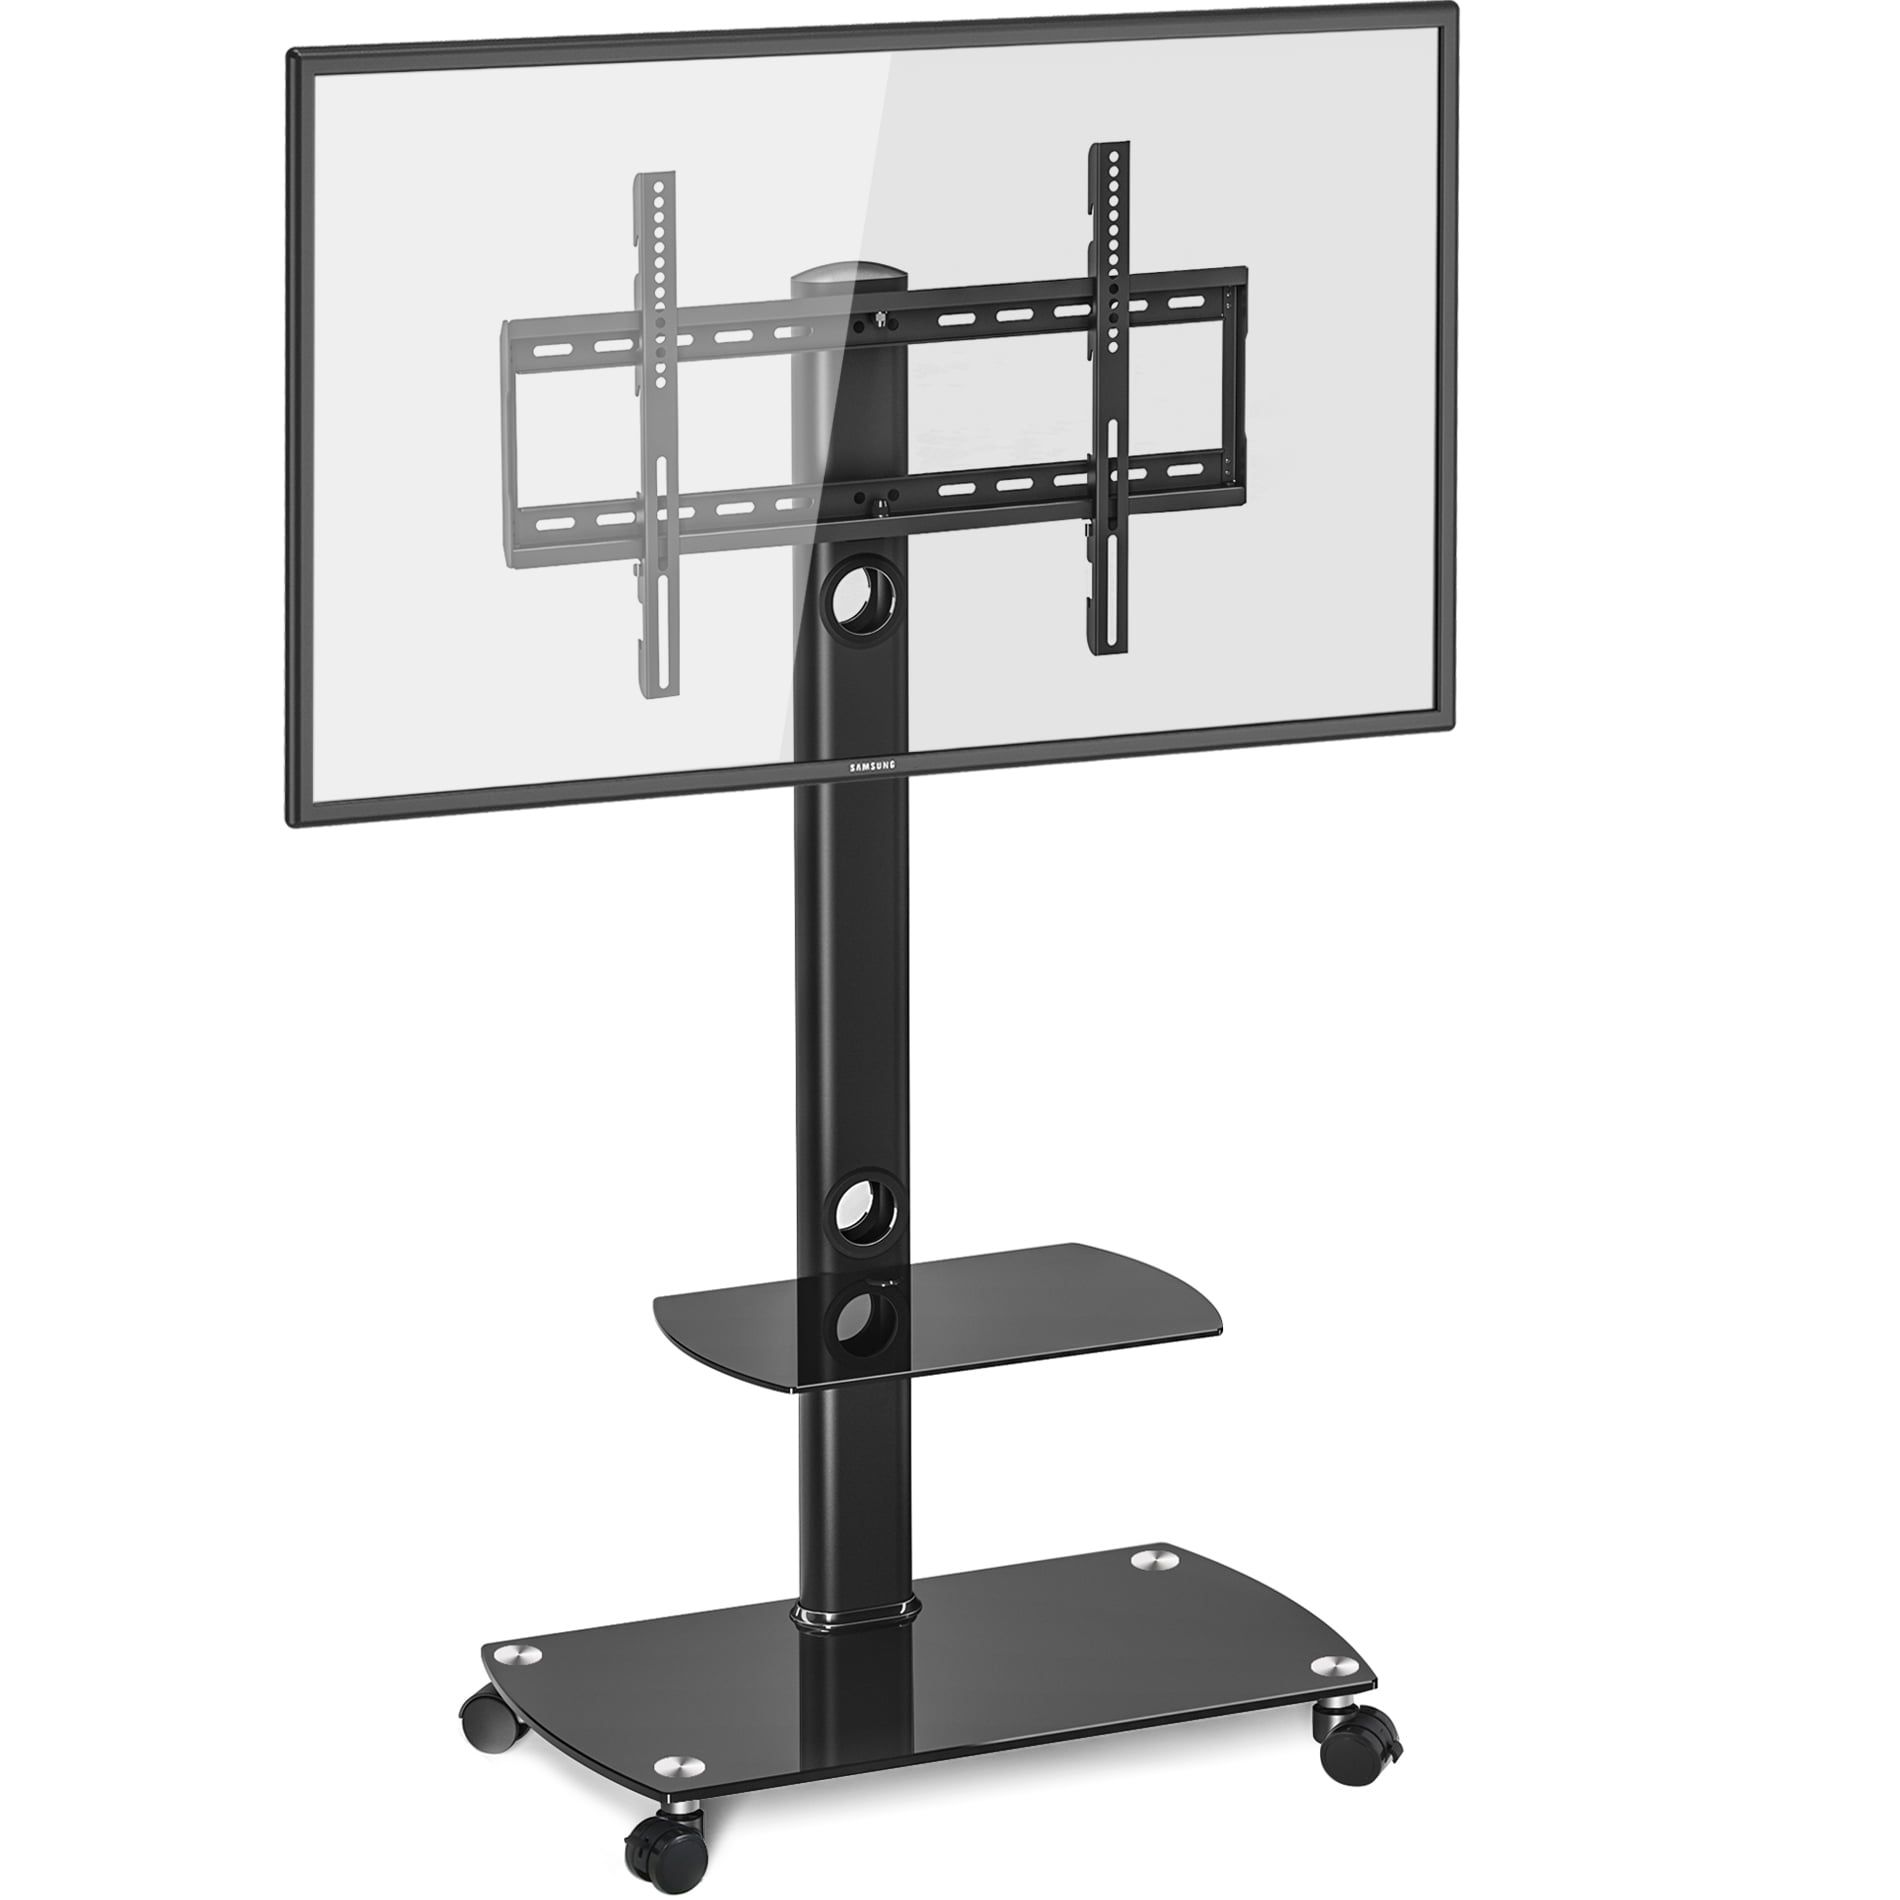 Mobile Floor Tv Stand Trolley Cart With Mount Display For 32 To 65 Inch Regarding Mobile Tilt Rolling Tv Stands (Gallery 16 of 20)